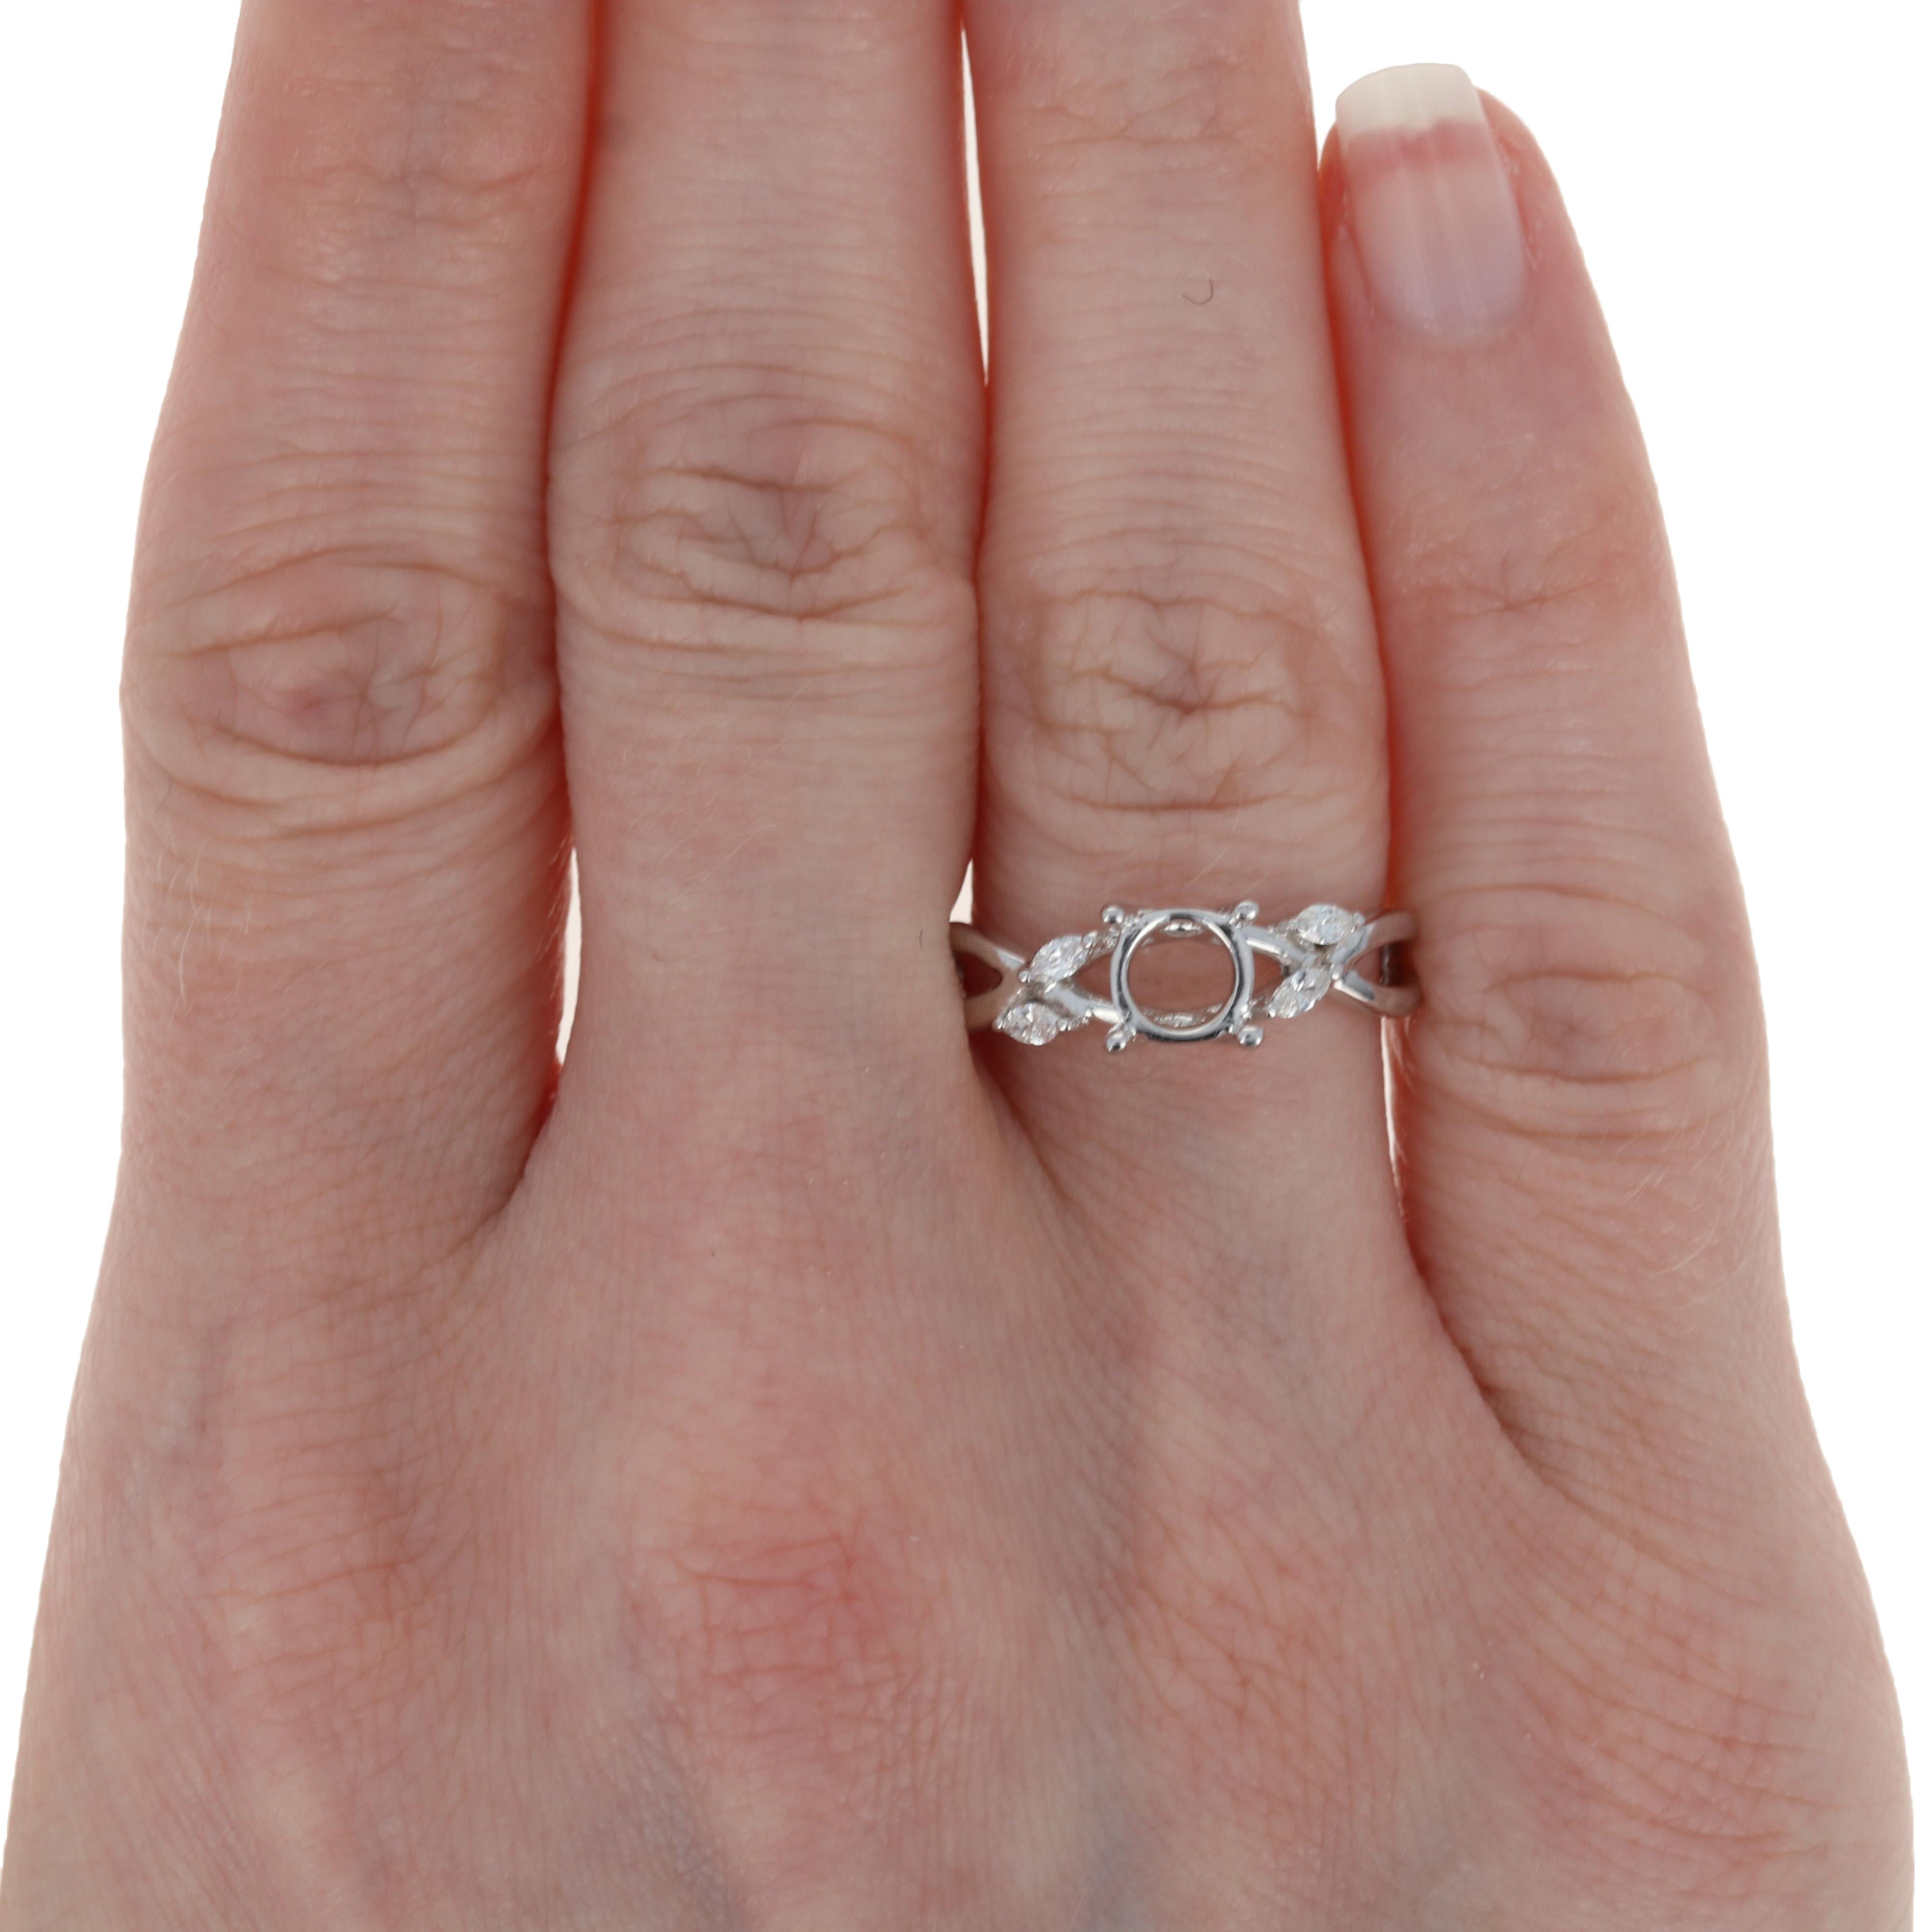 Searching for the perfect setting for an heirloom diamond or gemstone? Your quest ends here with this semi-mount wedding set. Fashioned in 14k white gold, this NEW set is comprised of an engagement ring that will accommodate a 6.5mm stone and a